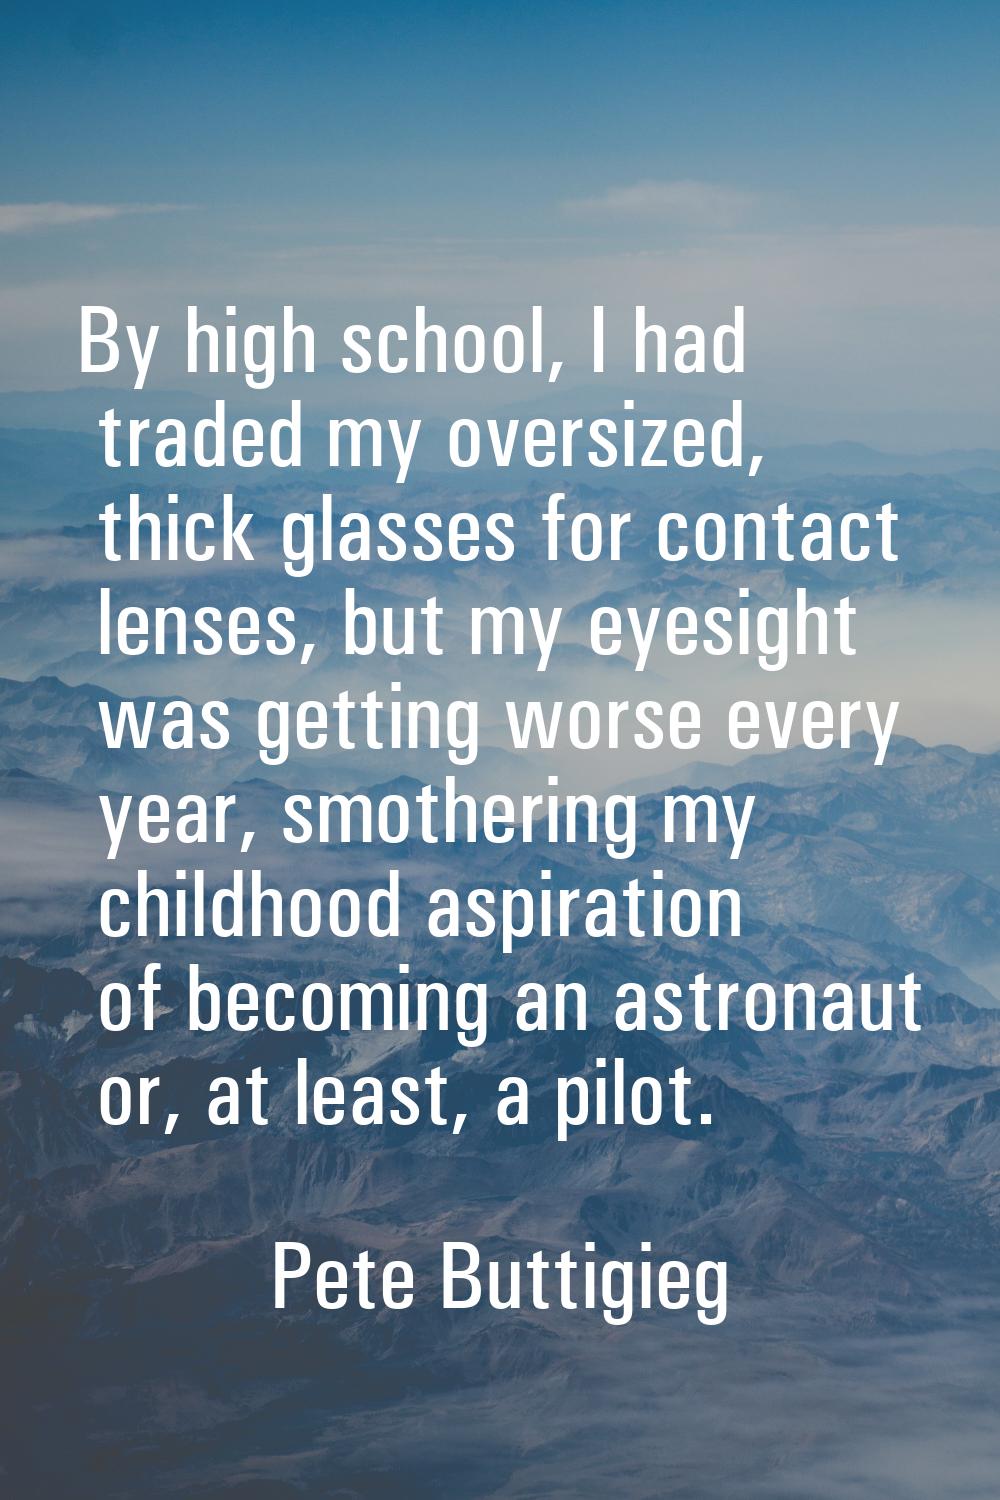 By high school, I had traded my oversized, thick glasses for contact lenses, but my eyesight was ge